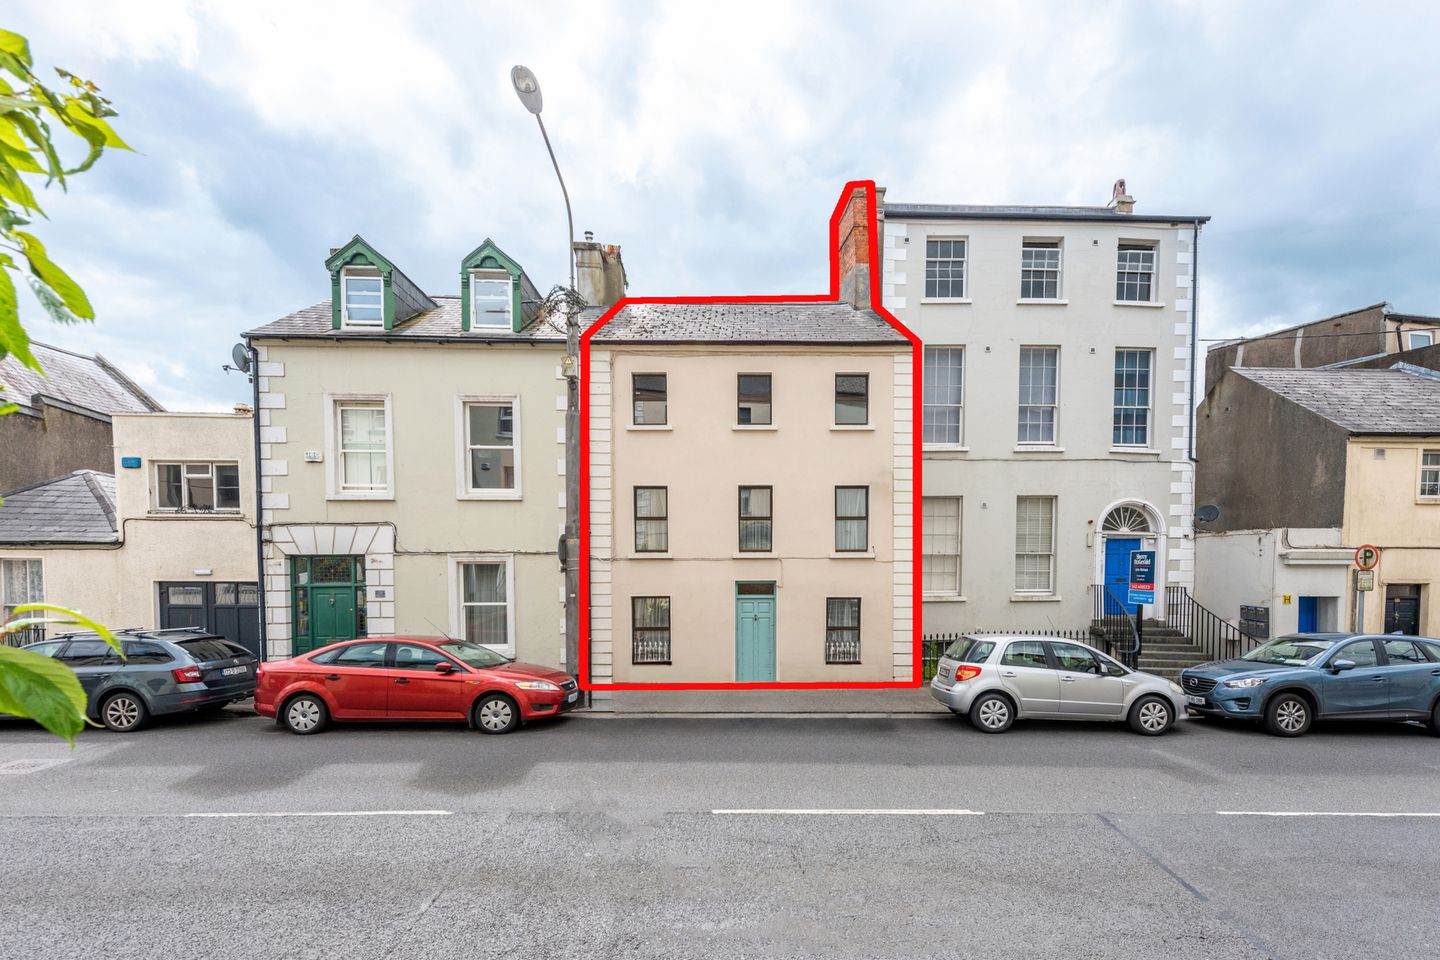 24 Catherine Street, Waterford, Waterford City, Co. Waterford, X91K40F